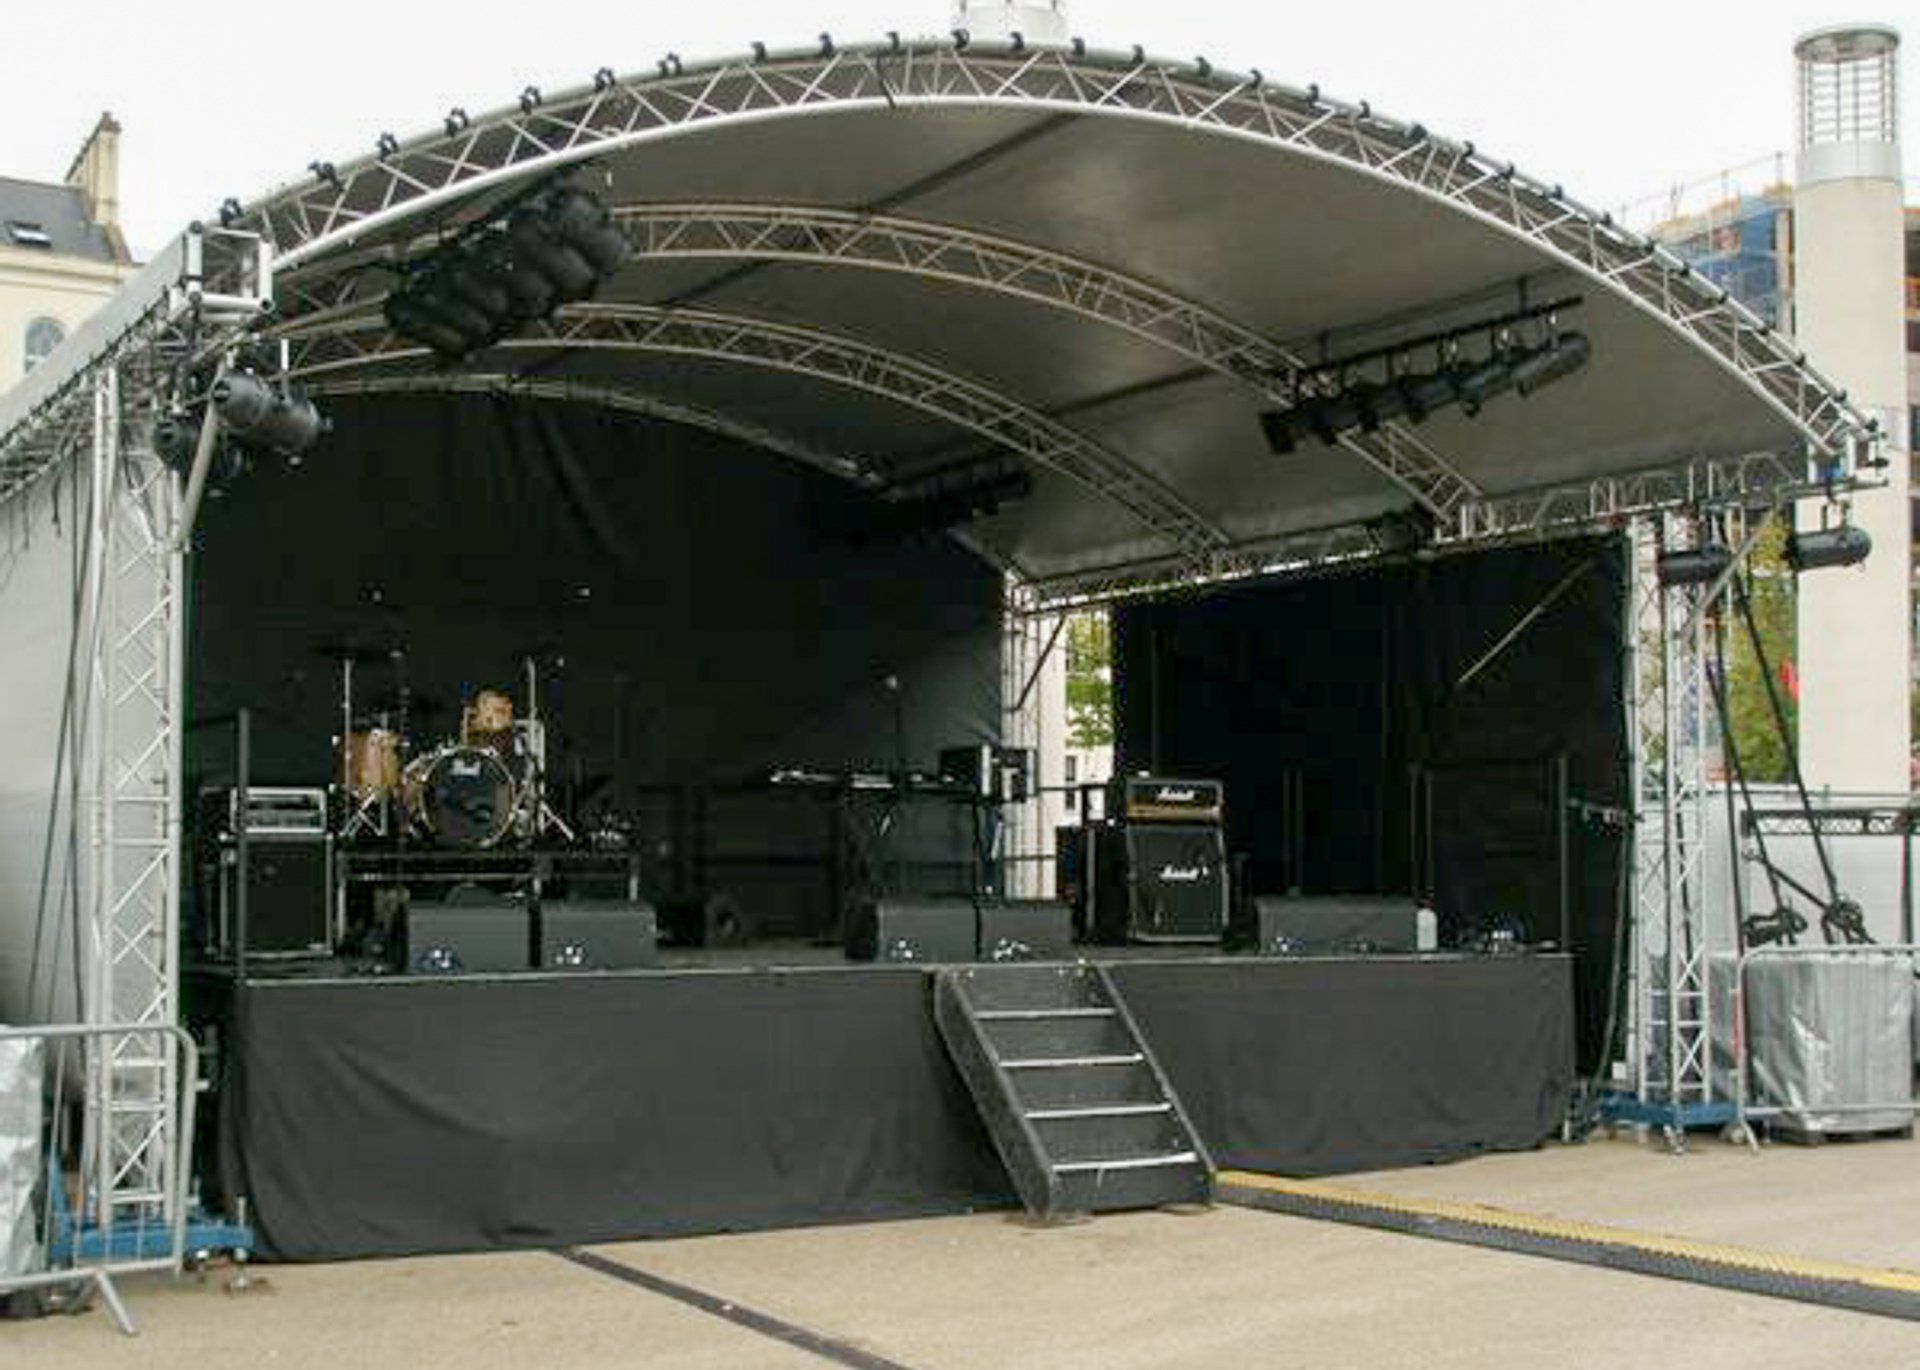 X-Large Arc Truss stage set up for an event on contract hire with steps at the front